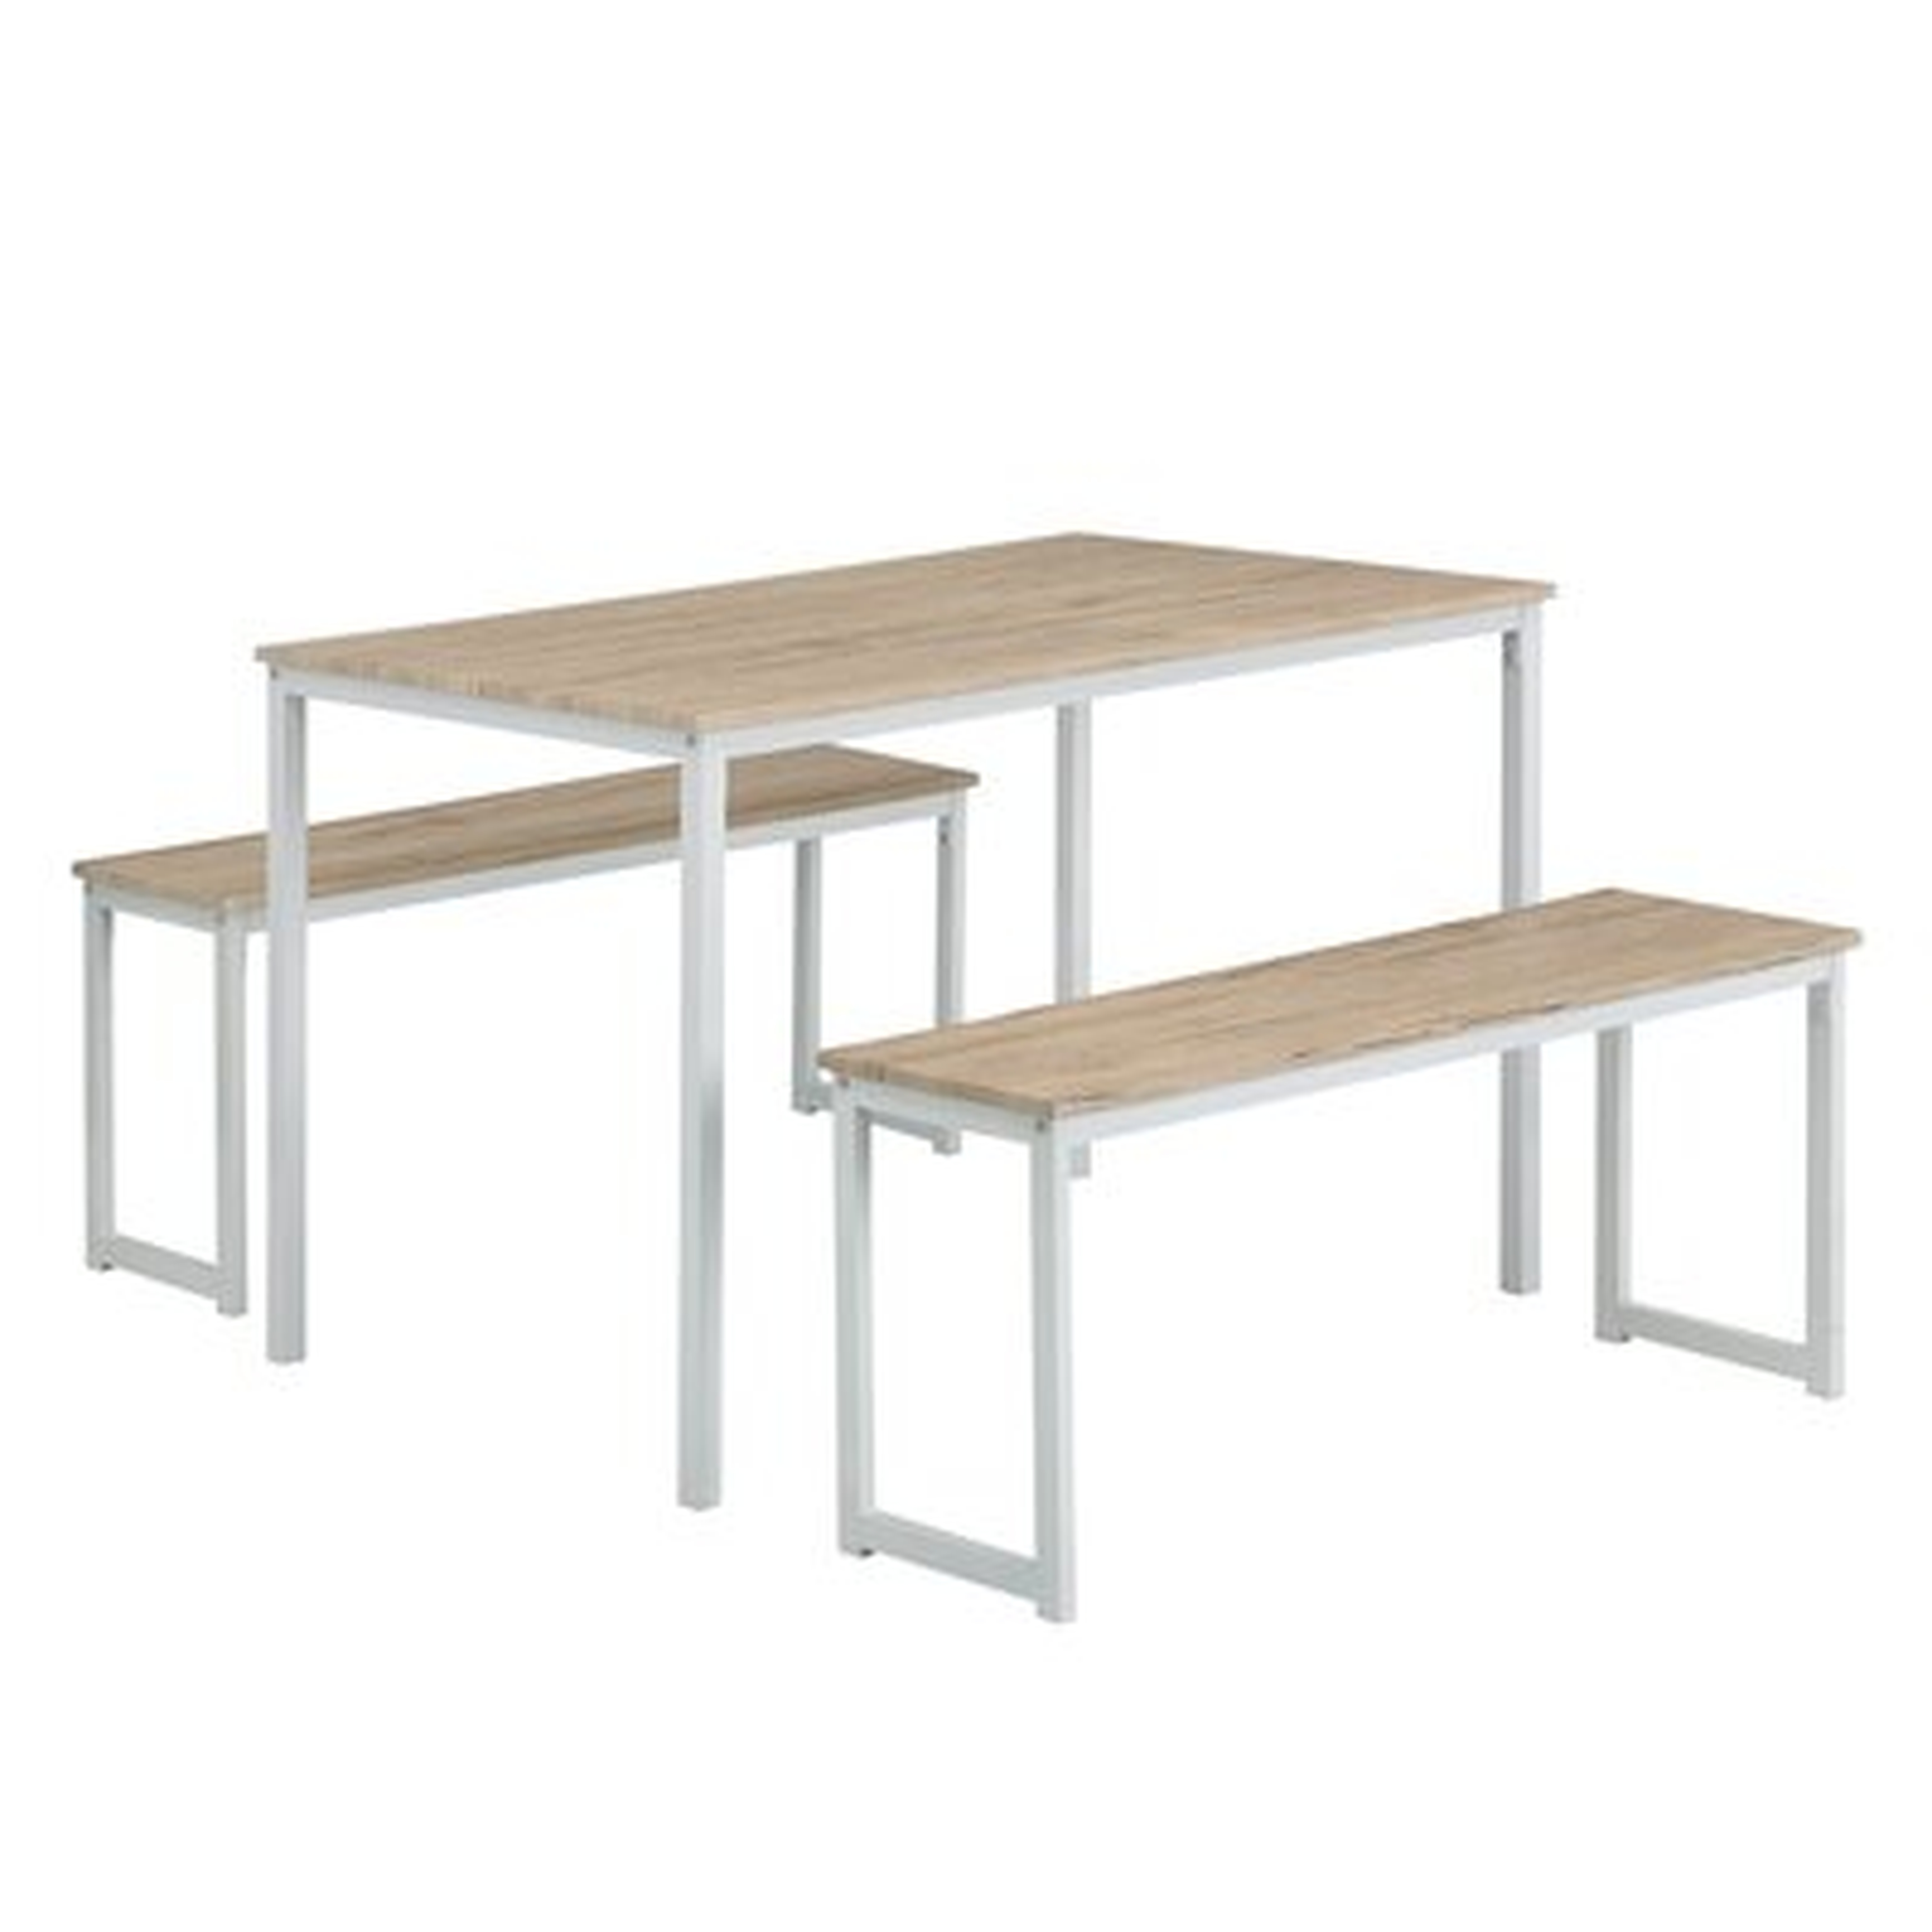 3 Piece Dining Set, Kitchen Table With Benches - Wayfair